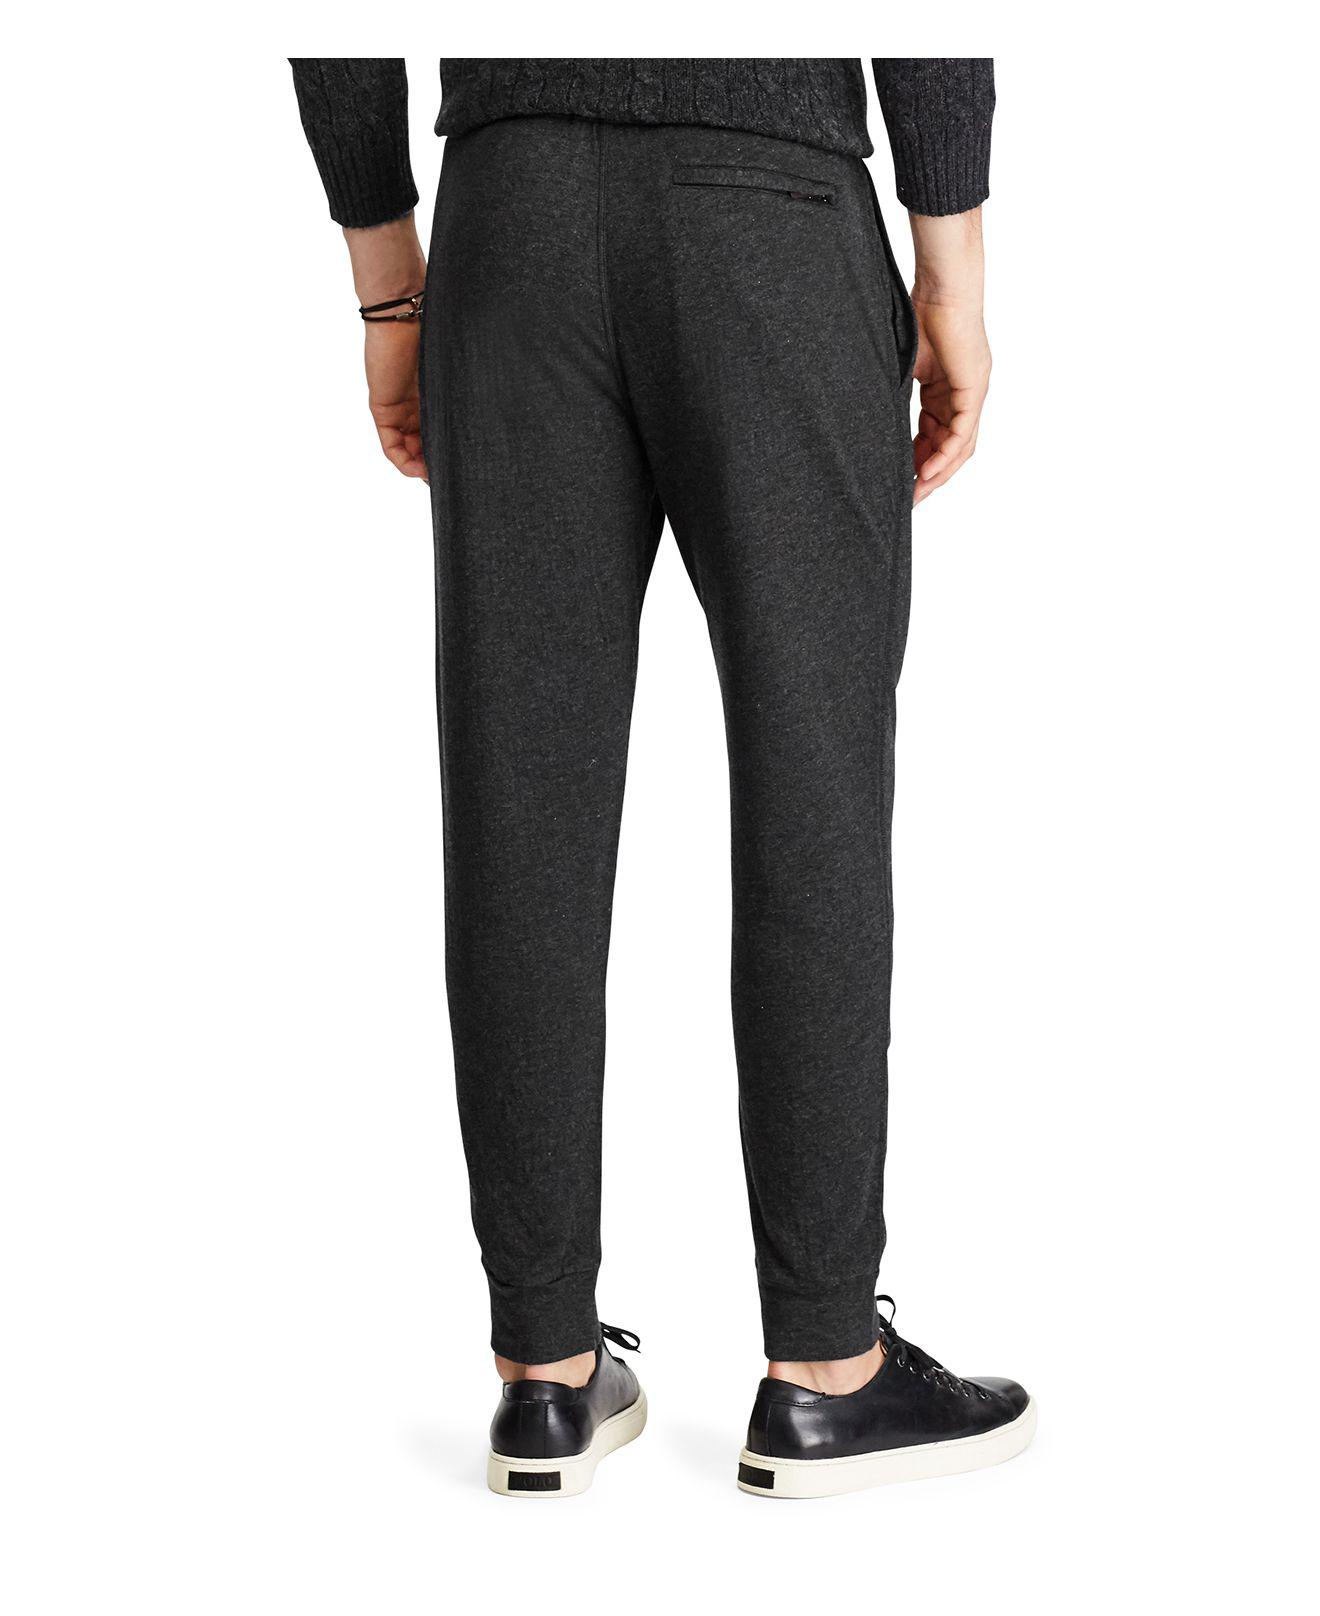 Lyst - Polo ralph lauren Tapered Knit Jogger Pants in Black for Men